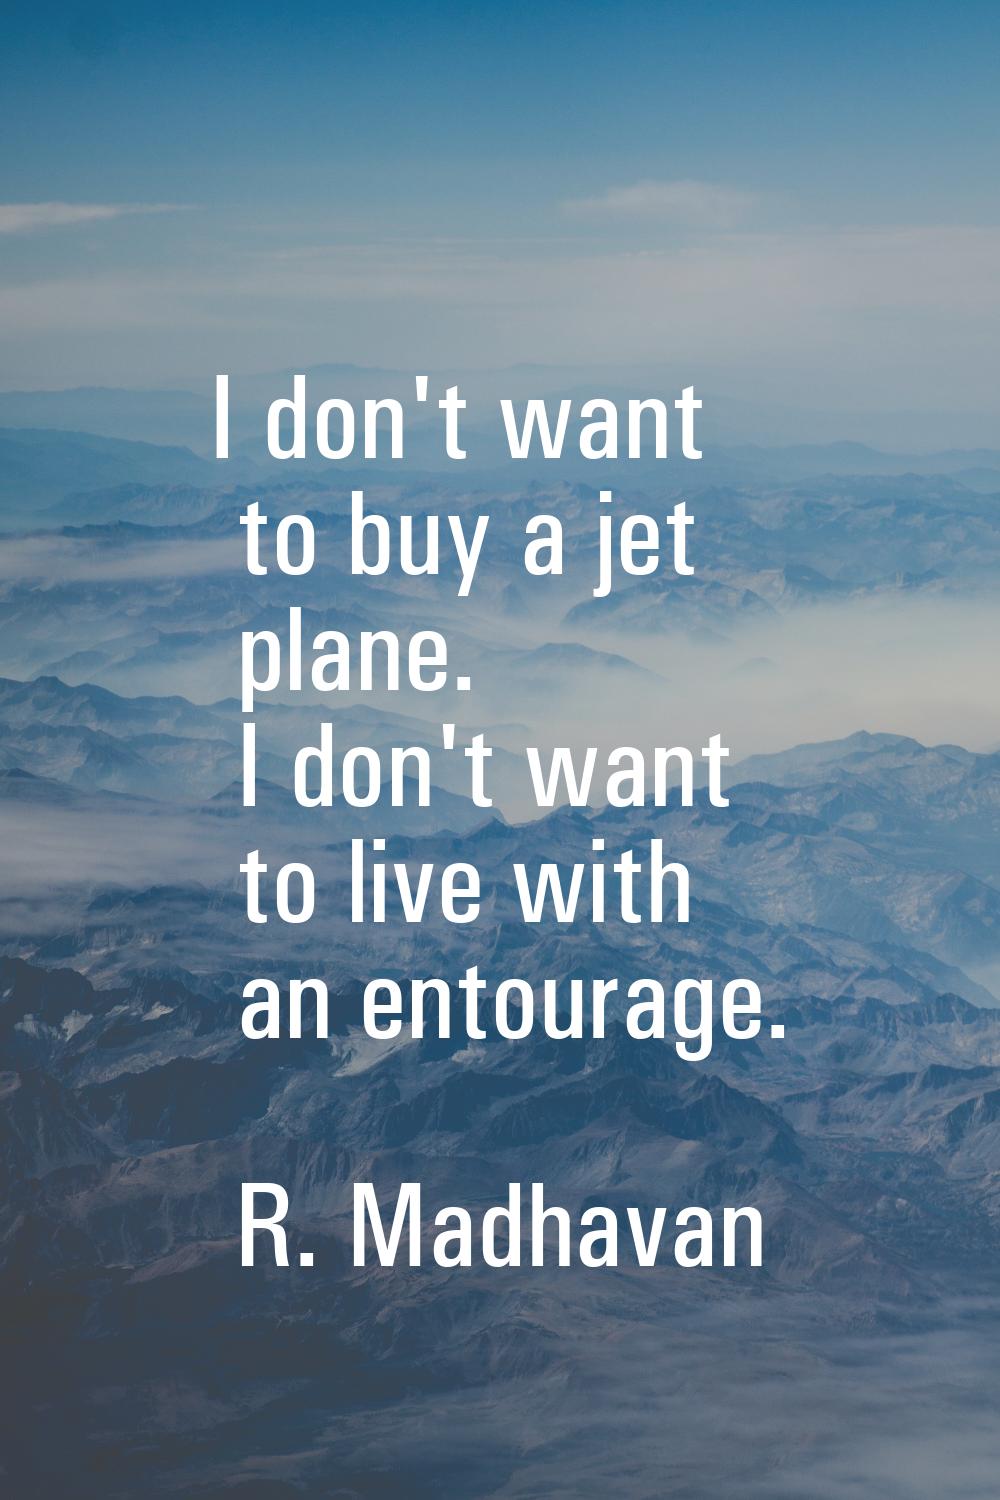 I don't want to buy a jet plane. I don't want to live with an entourage.